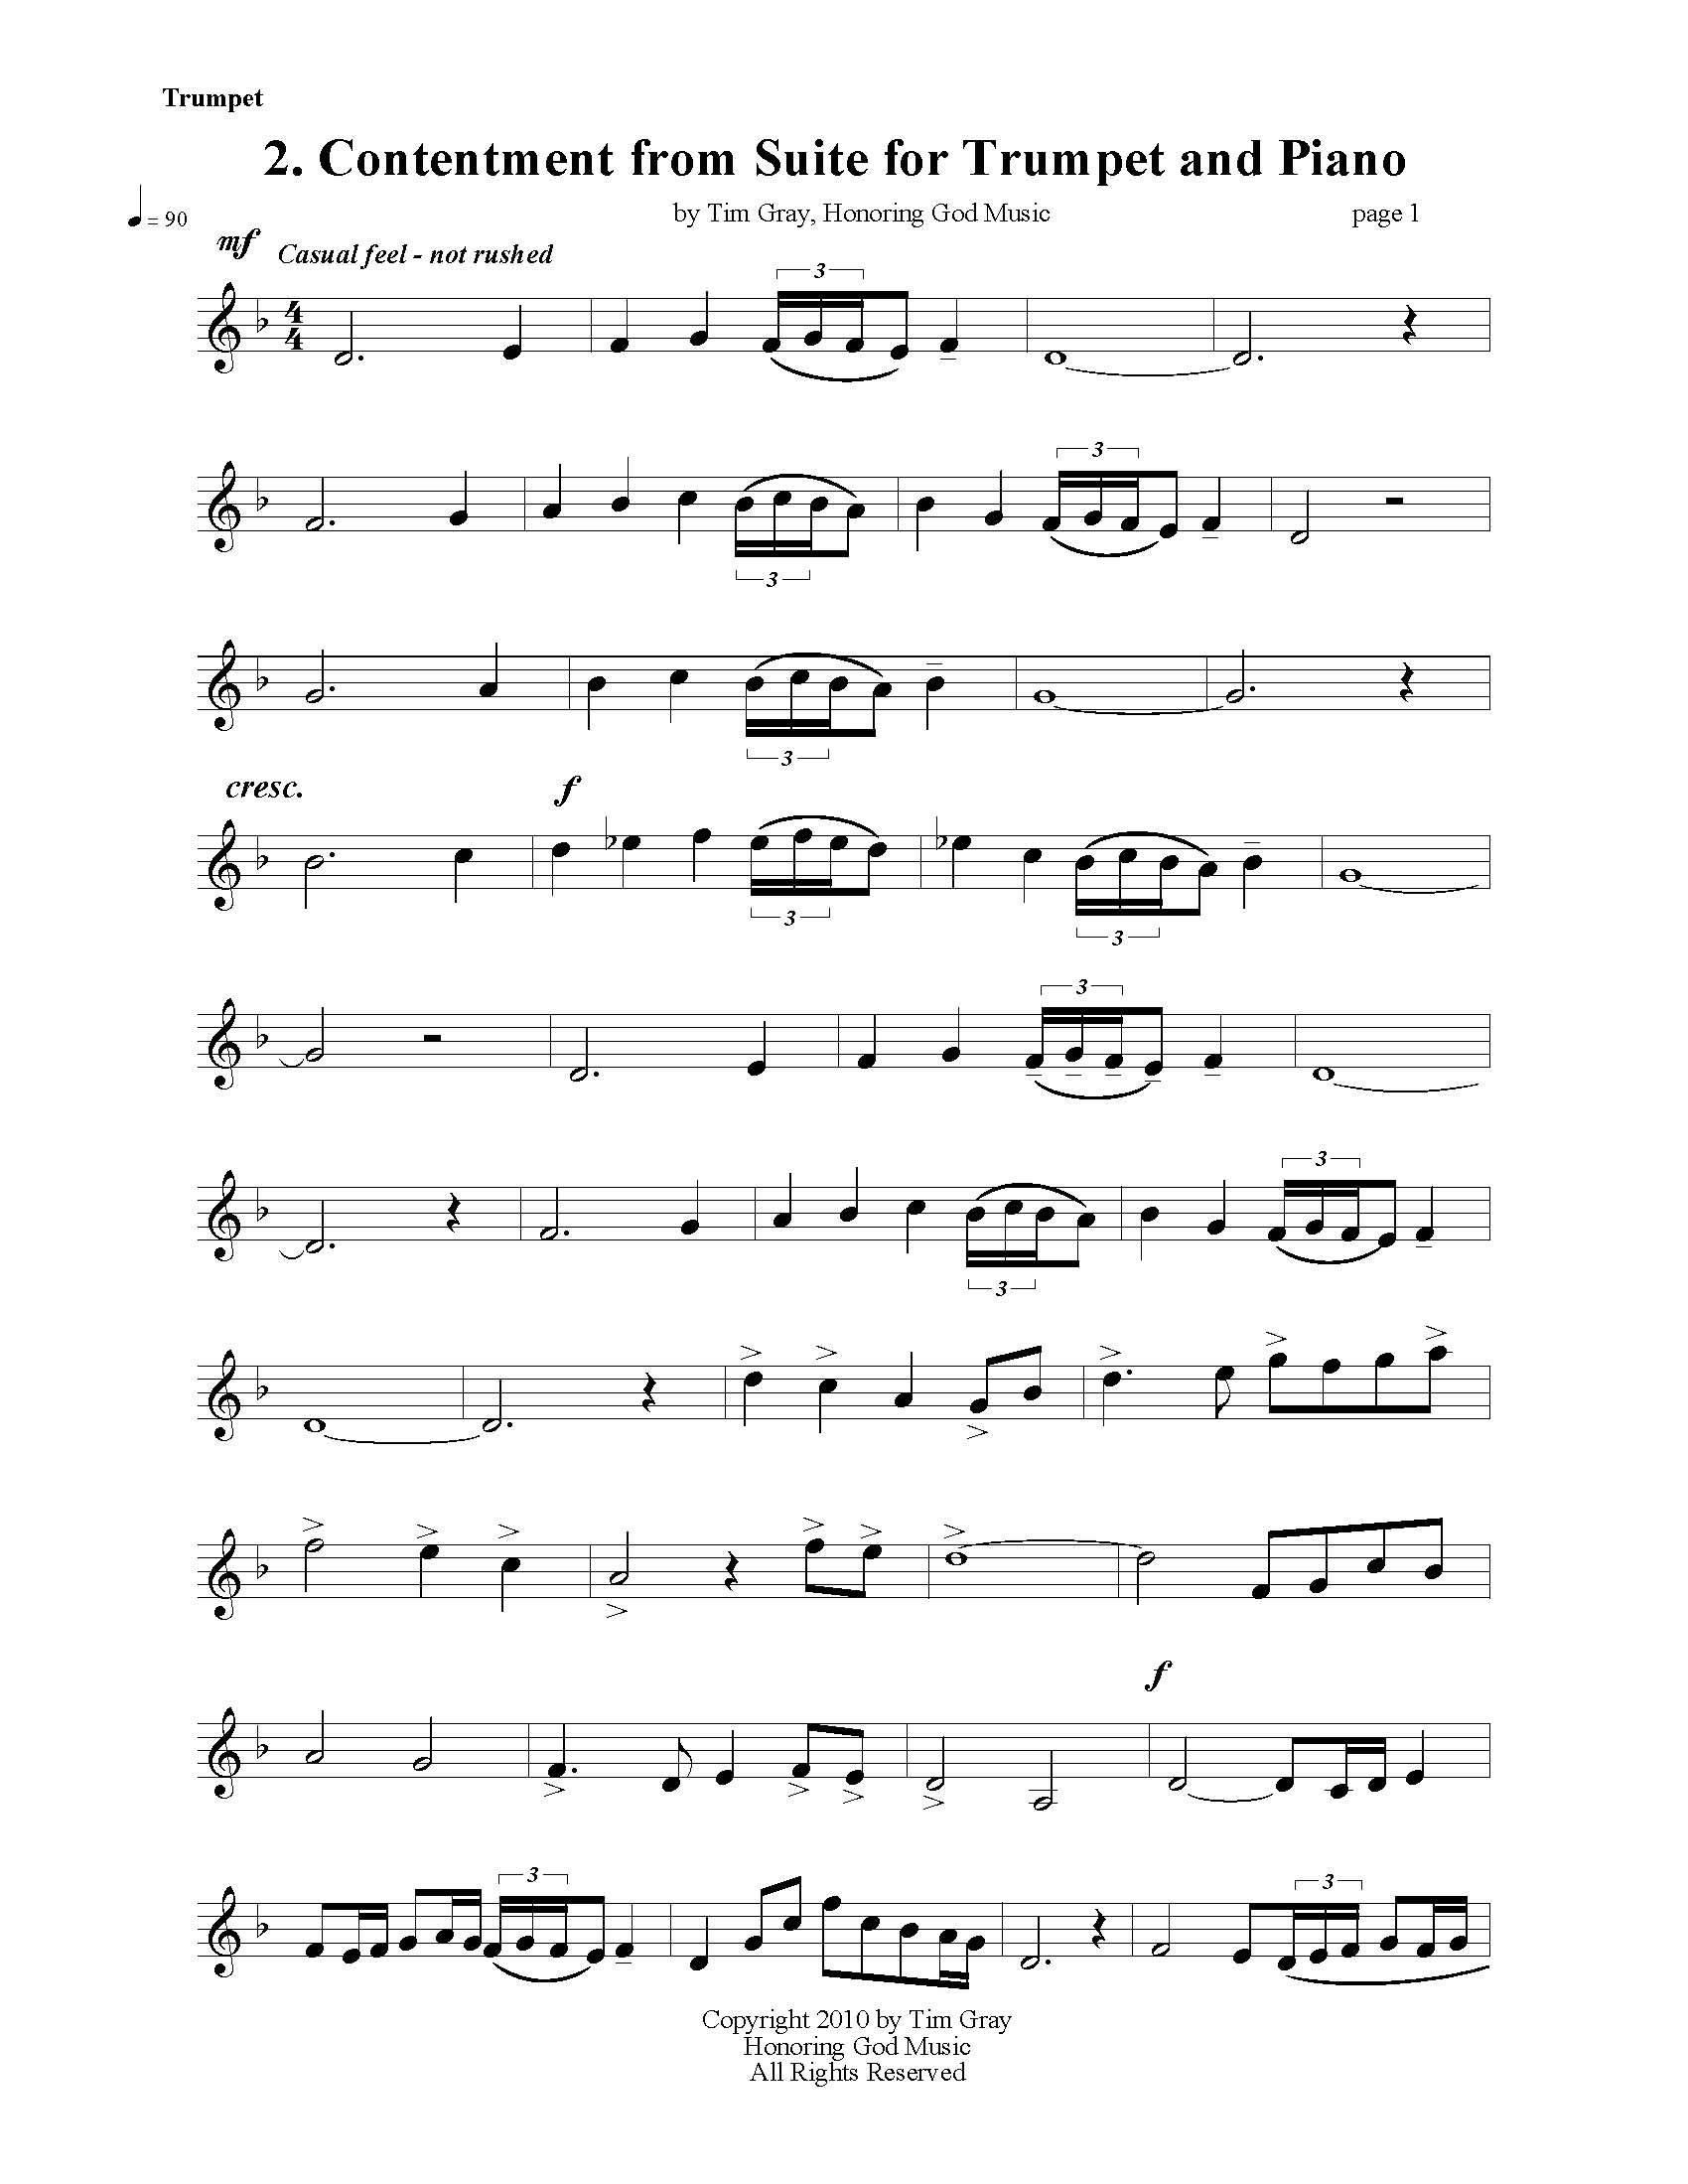 Contentment from Suite for Trumpet and Piano by Tim Gray sample page at HonoringGodMusic.com